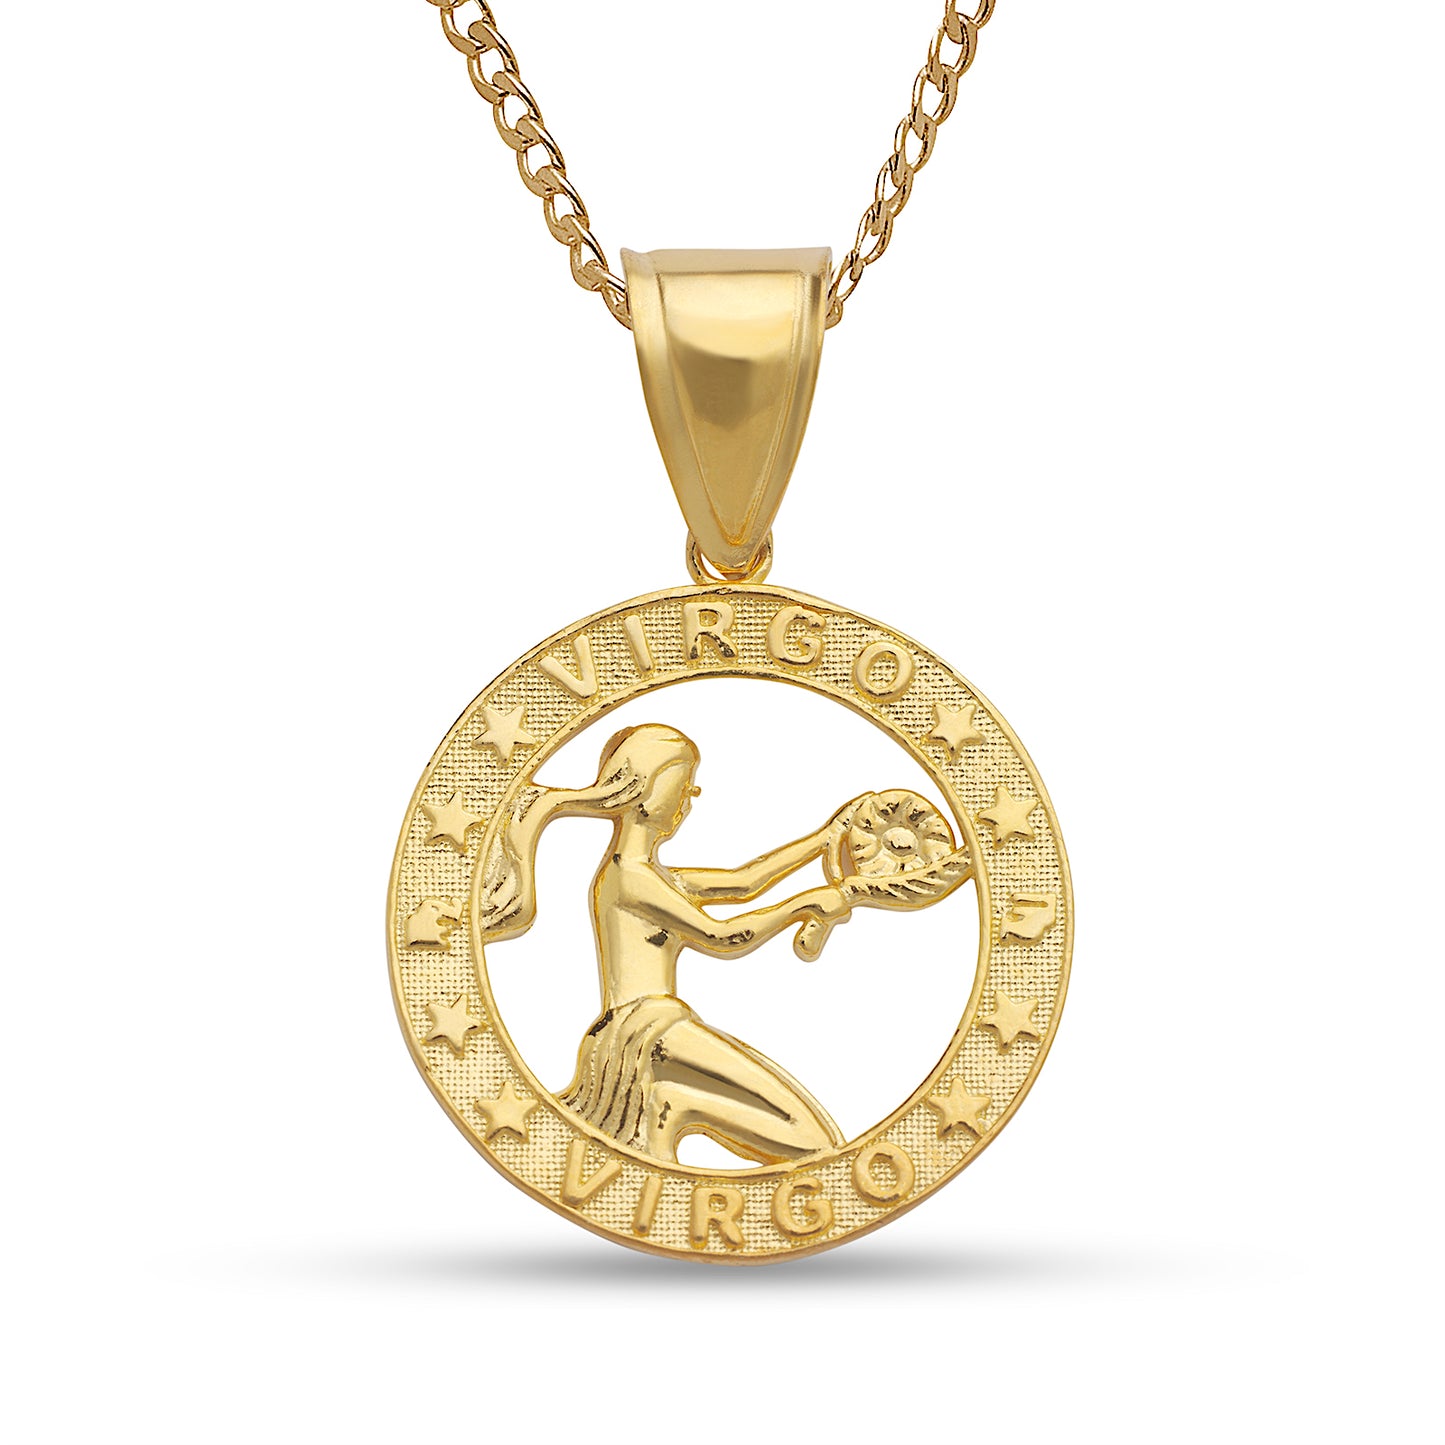 Better Jewelry 10k Yellow Gold Zodiac Sign Necklace w. Cuban Chain (Made in USA)